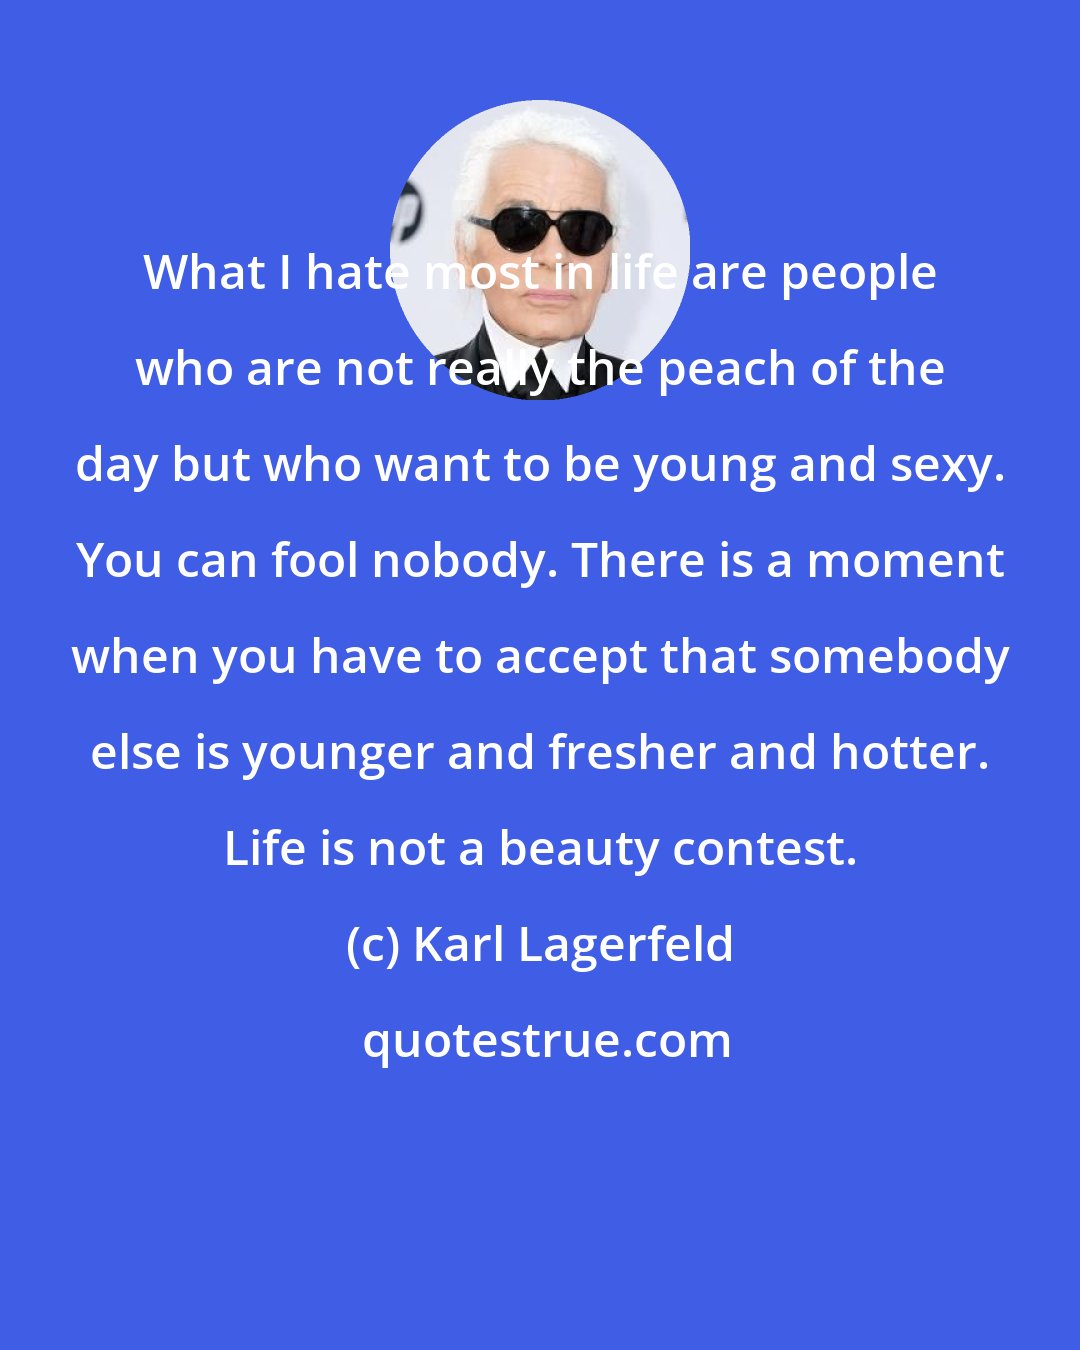 Karl Lagerfeld: What I hate most in life are people who are not really the peach of the day but who want to be young and sexy. You can fool nobody. There is a moment when you have to accept that somebody else is younger and fresher and hotter. Life is not a beauty contest.